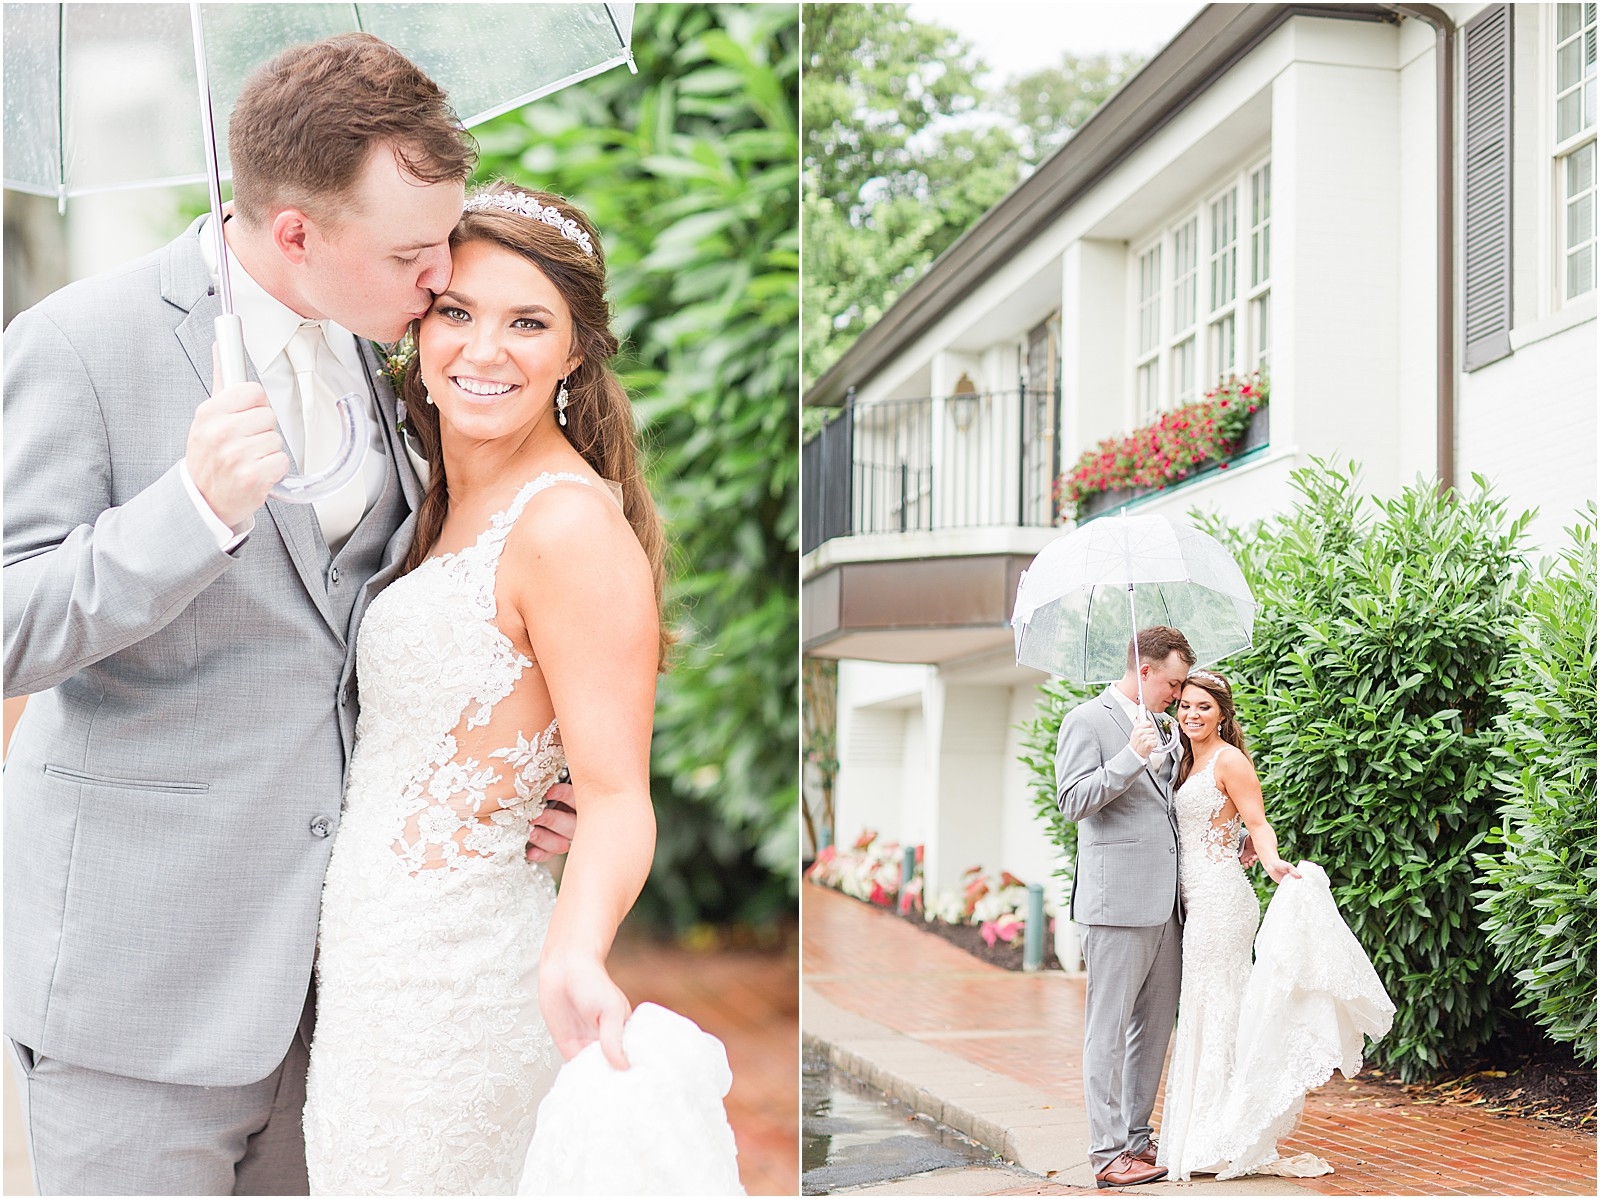 An Evansville County Club Wedding | Abby and Stratton 085.jpg